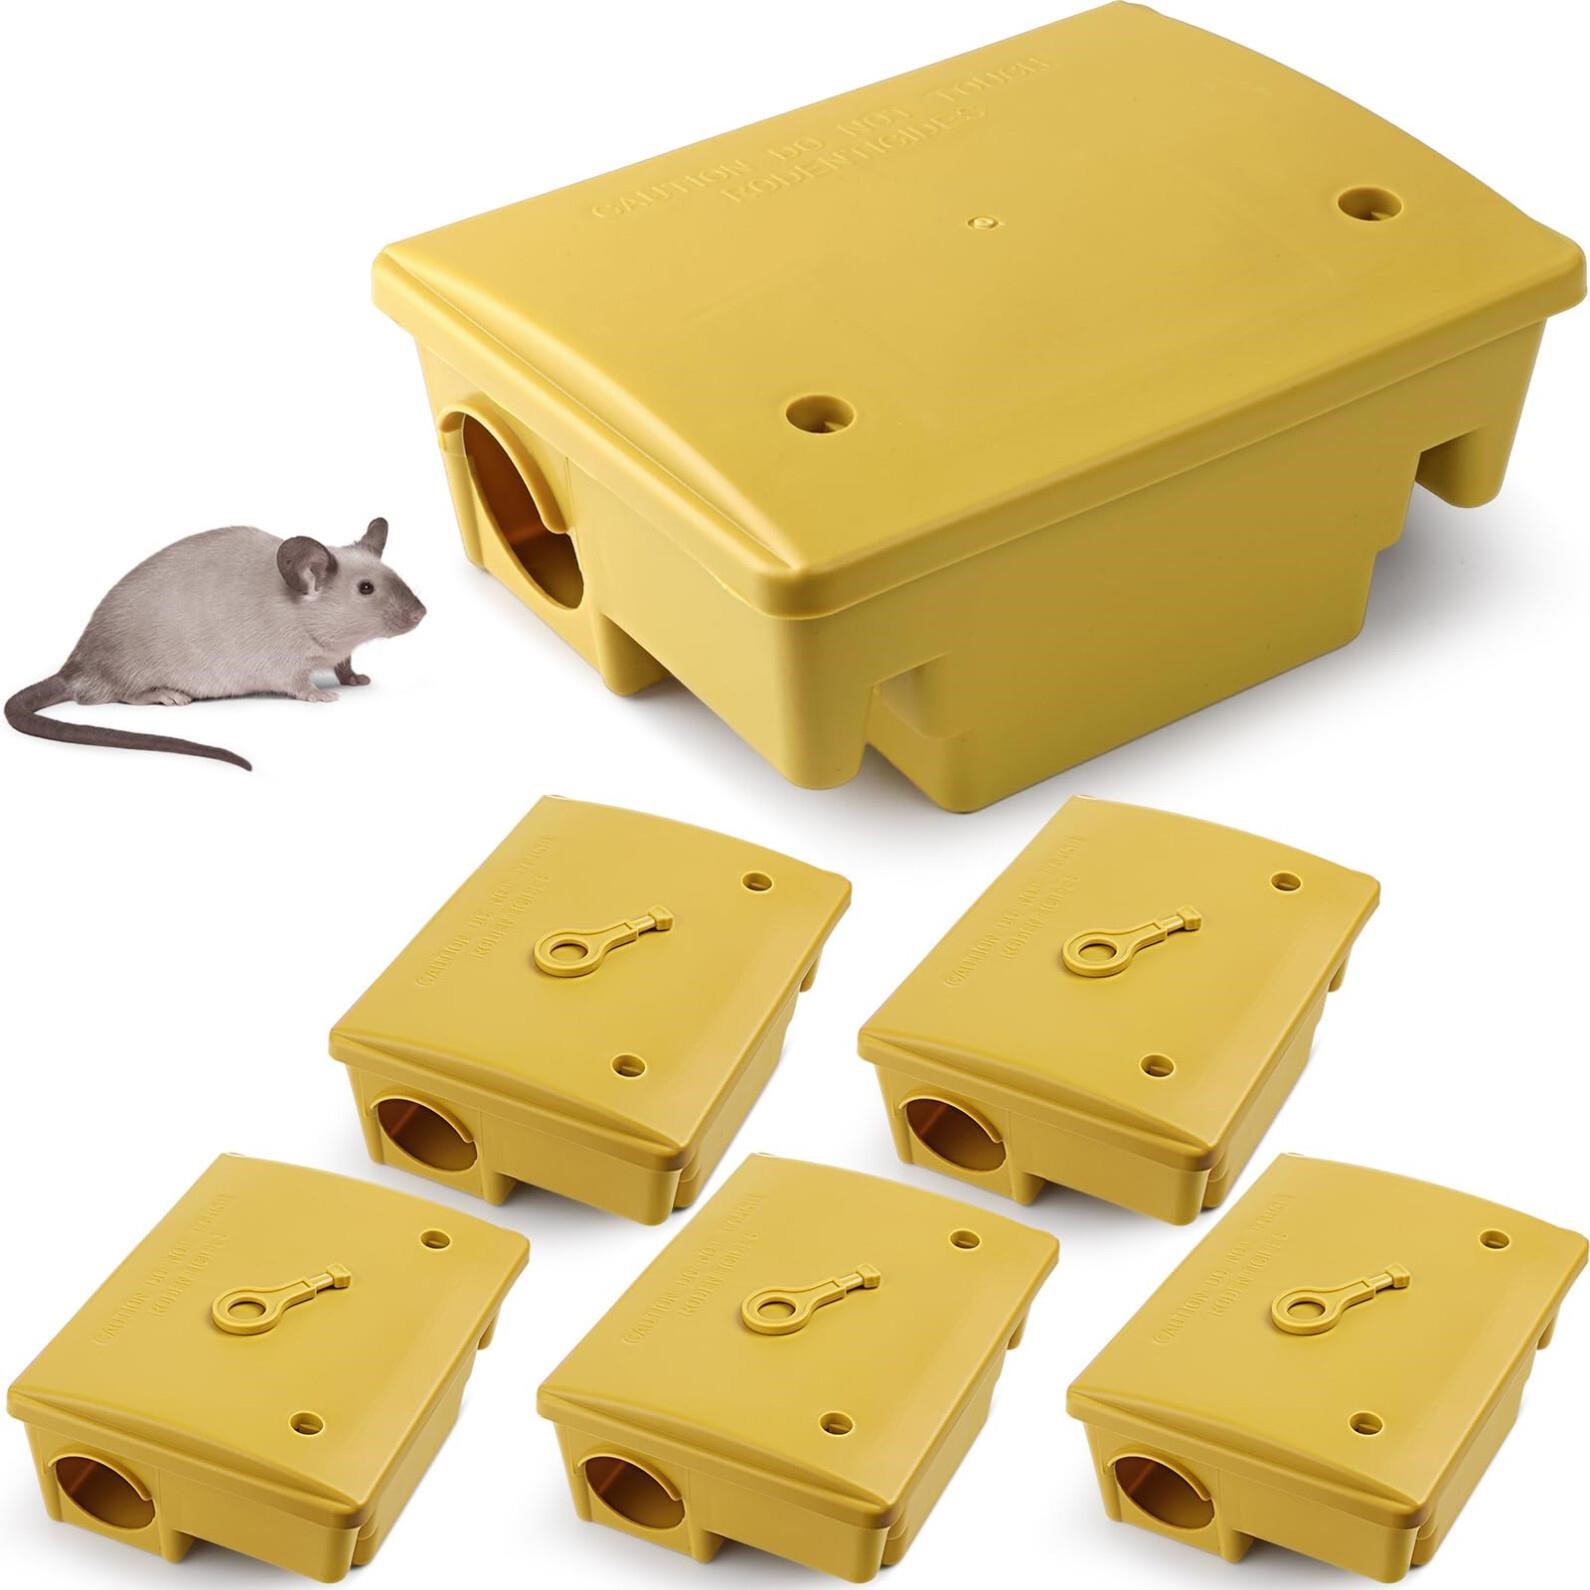 6 Pack Yellow Rat Bait Stations with Key